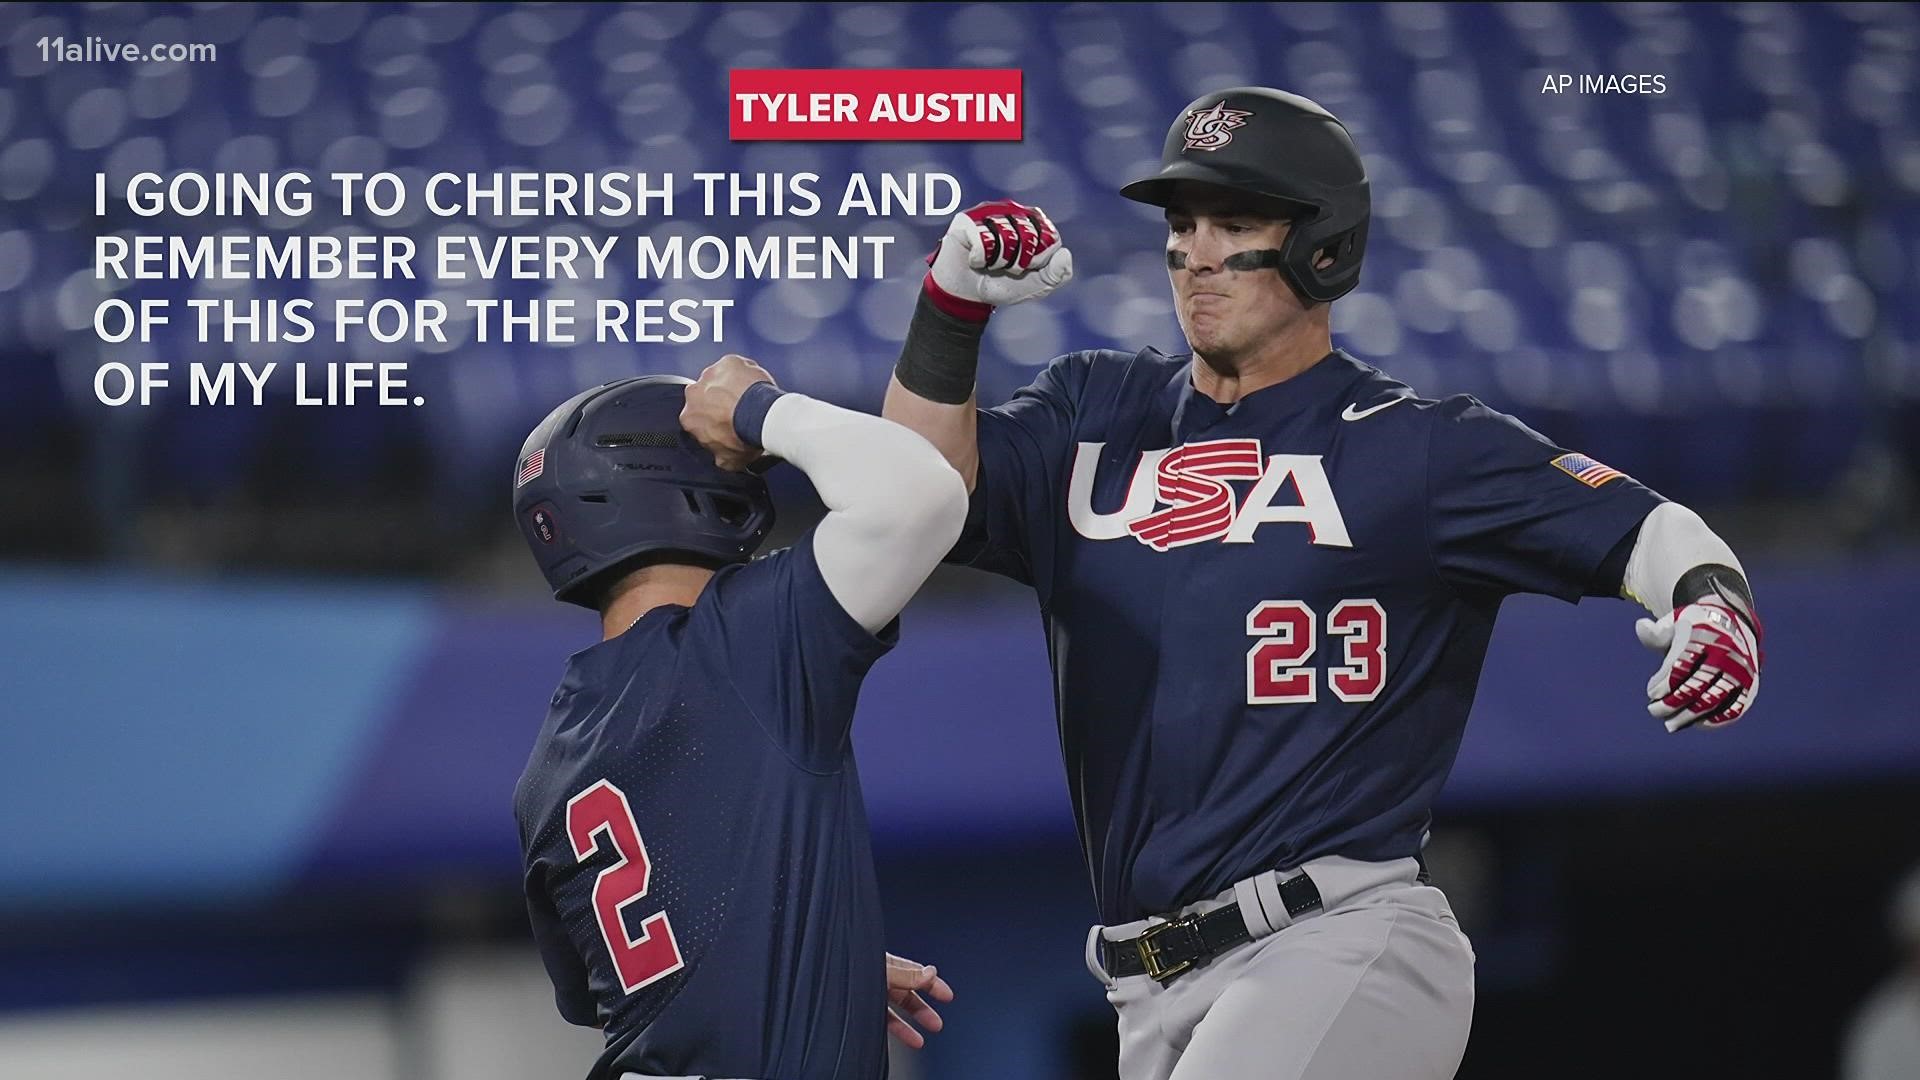 Why aren't MLB players at Olympics on USA Baseball team